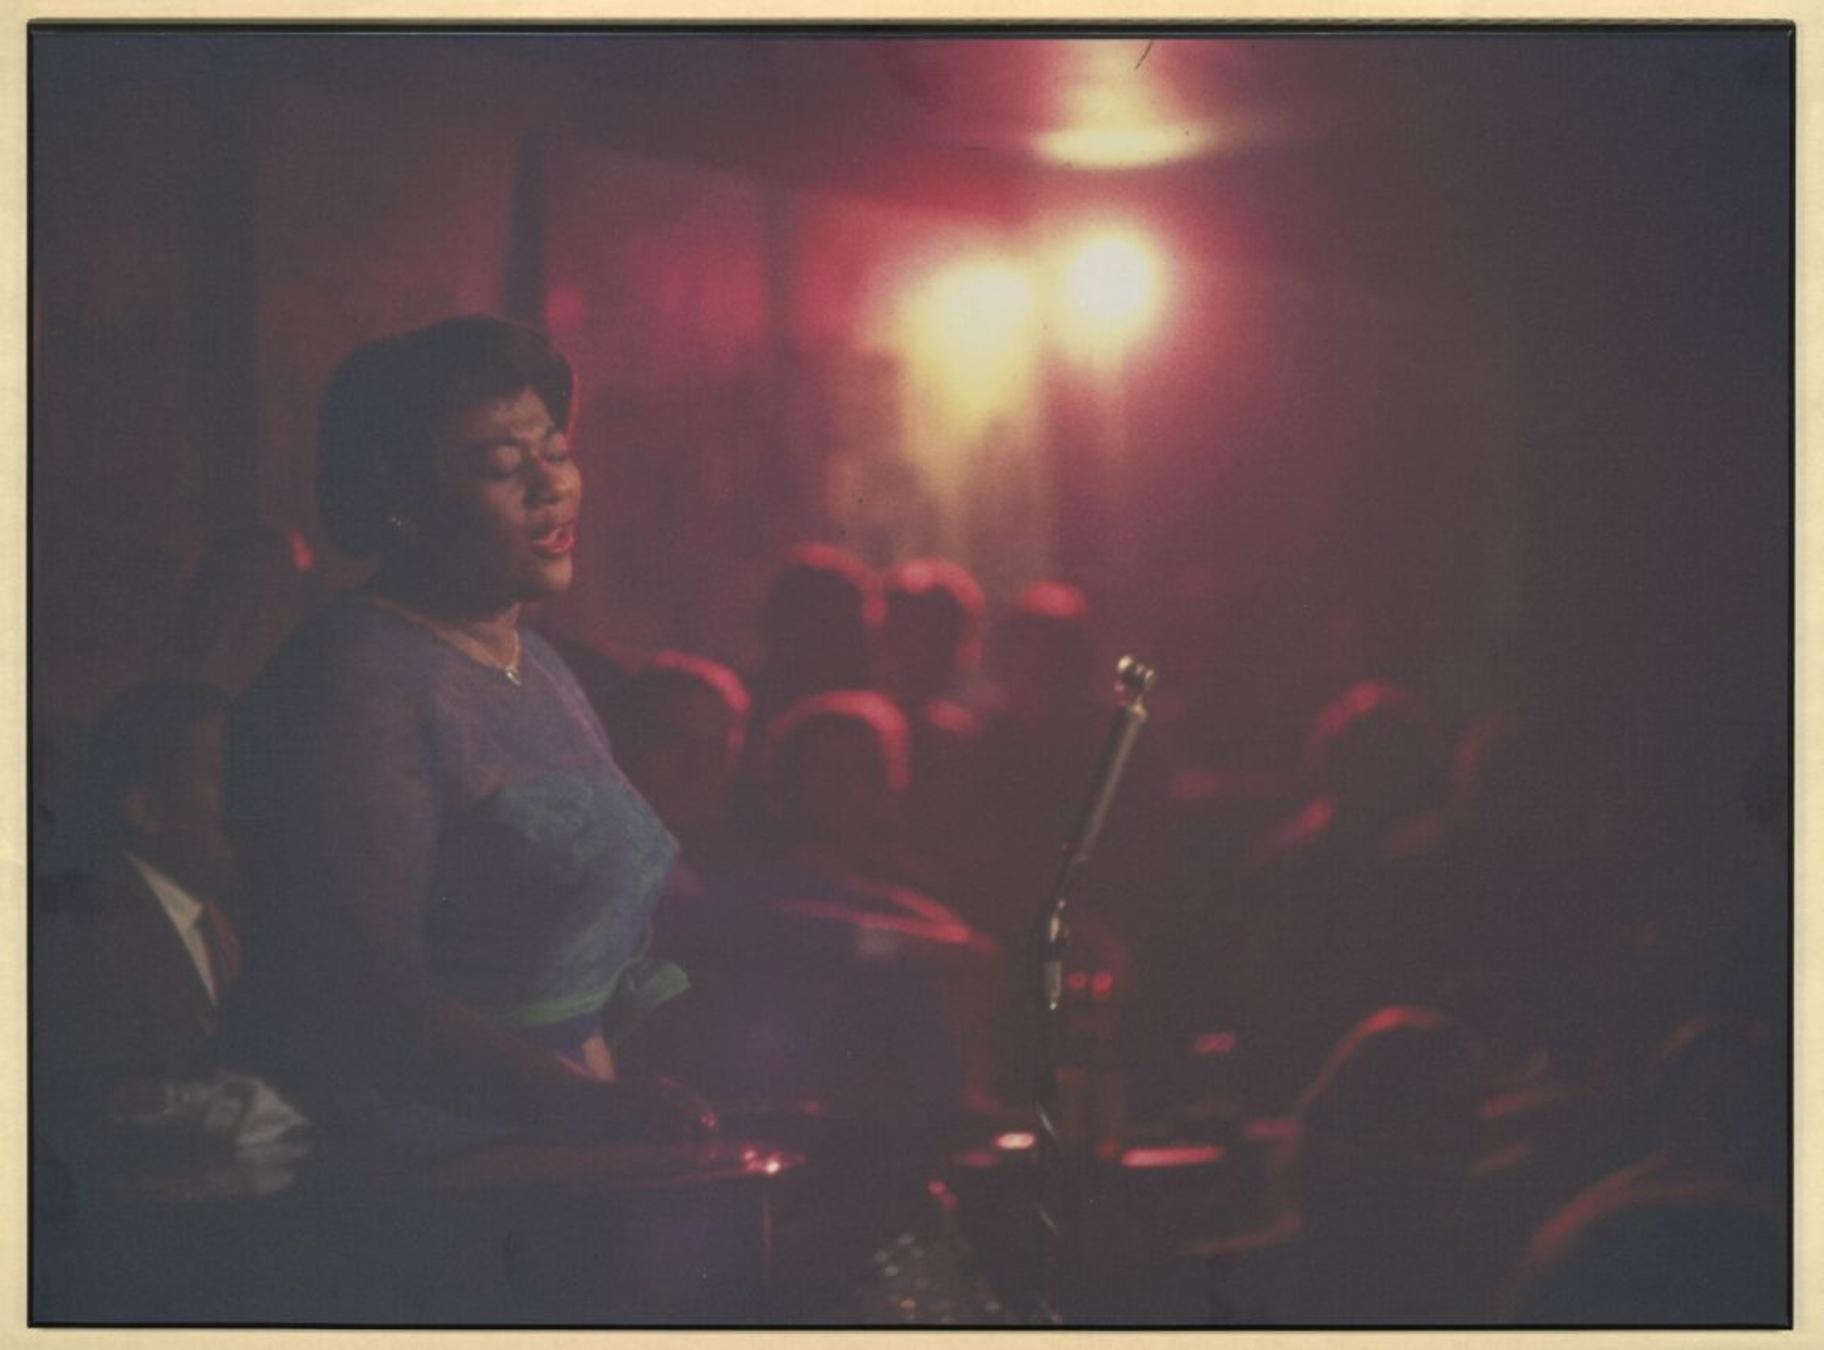 Ella Fitzgerald performs at Mister Kelly’s. Photograph from the “A Night at Mister Kelly’s” exhibit at the Newberry Library. (Courtesy of the Newberry Library)